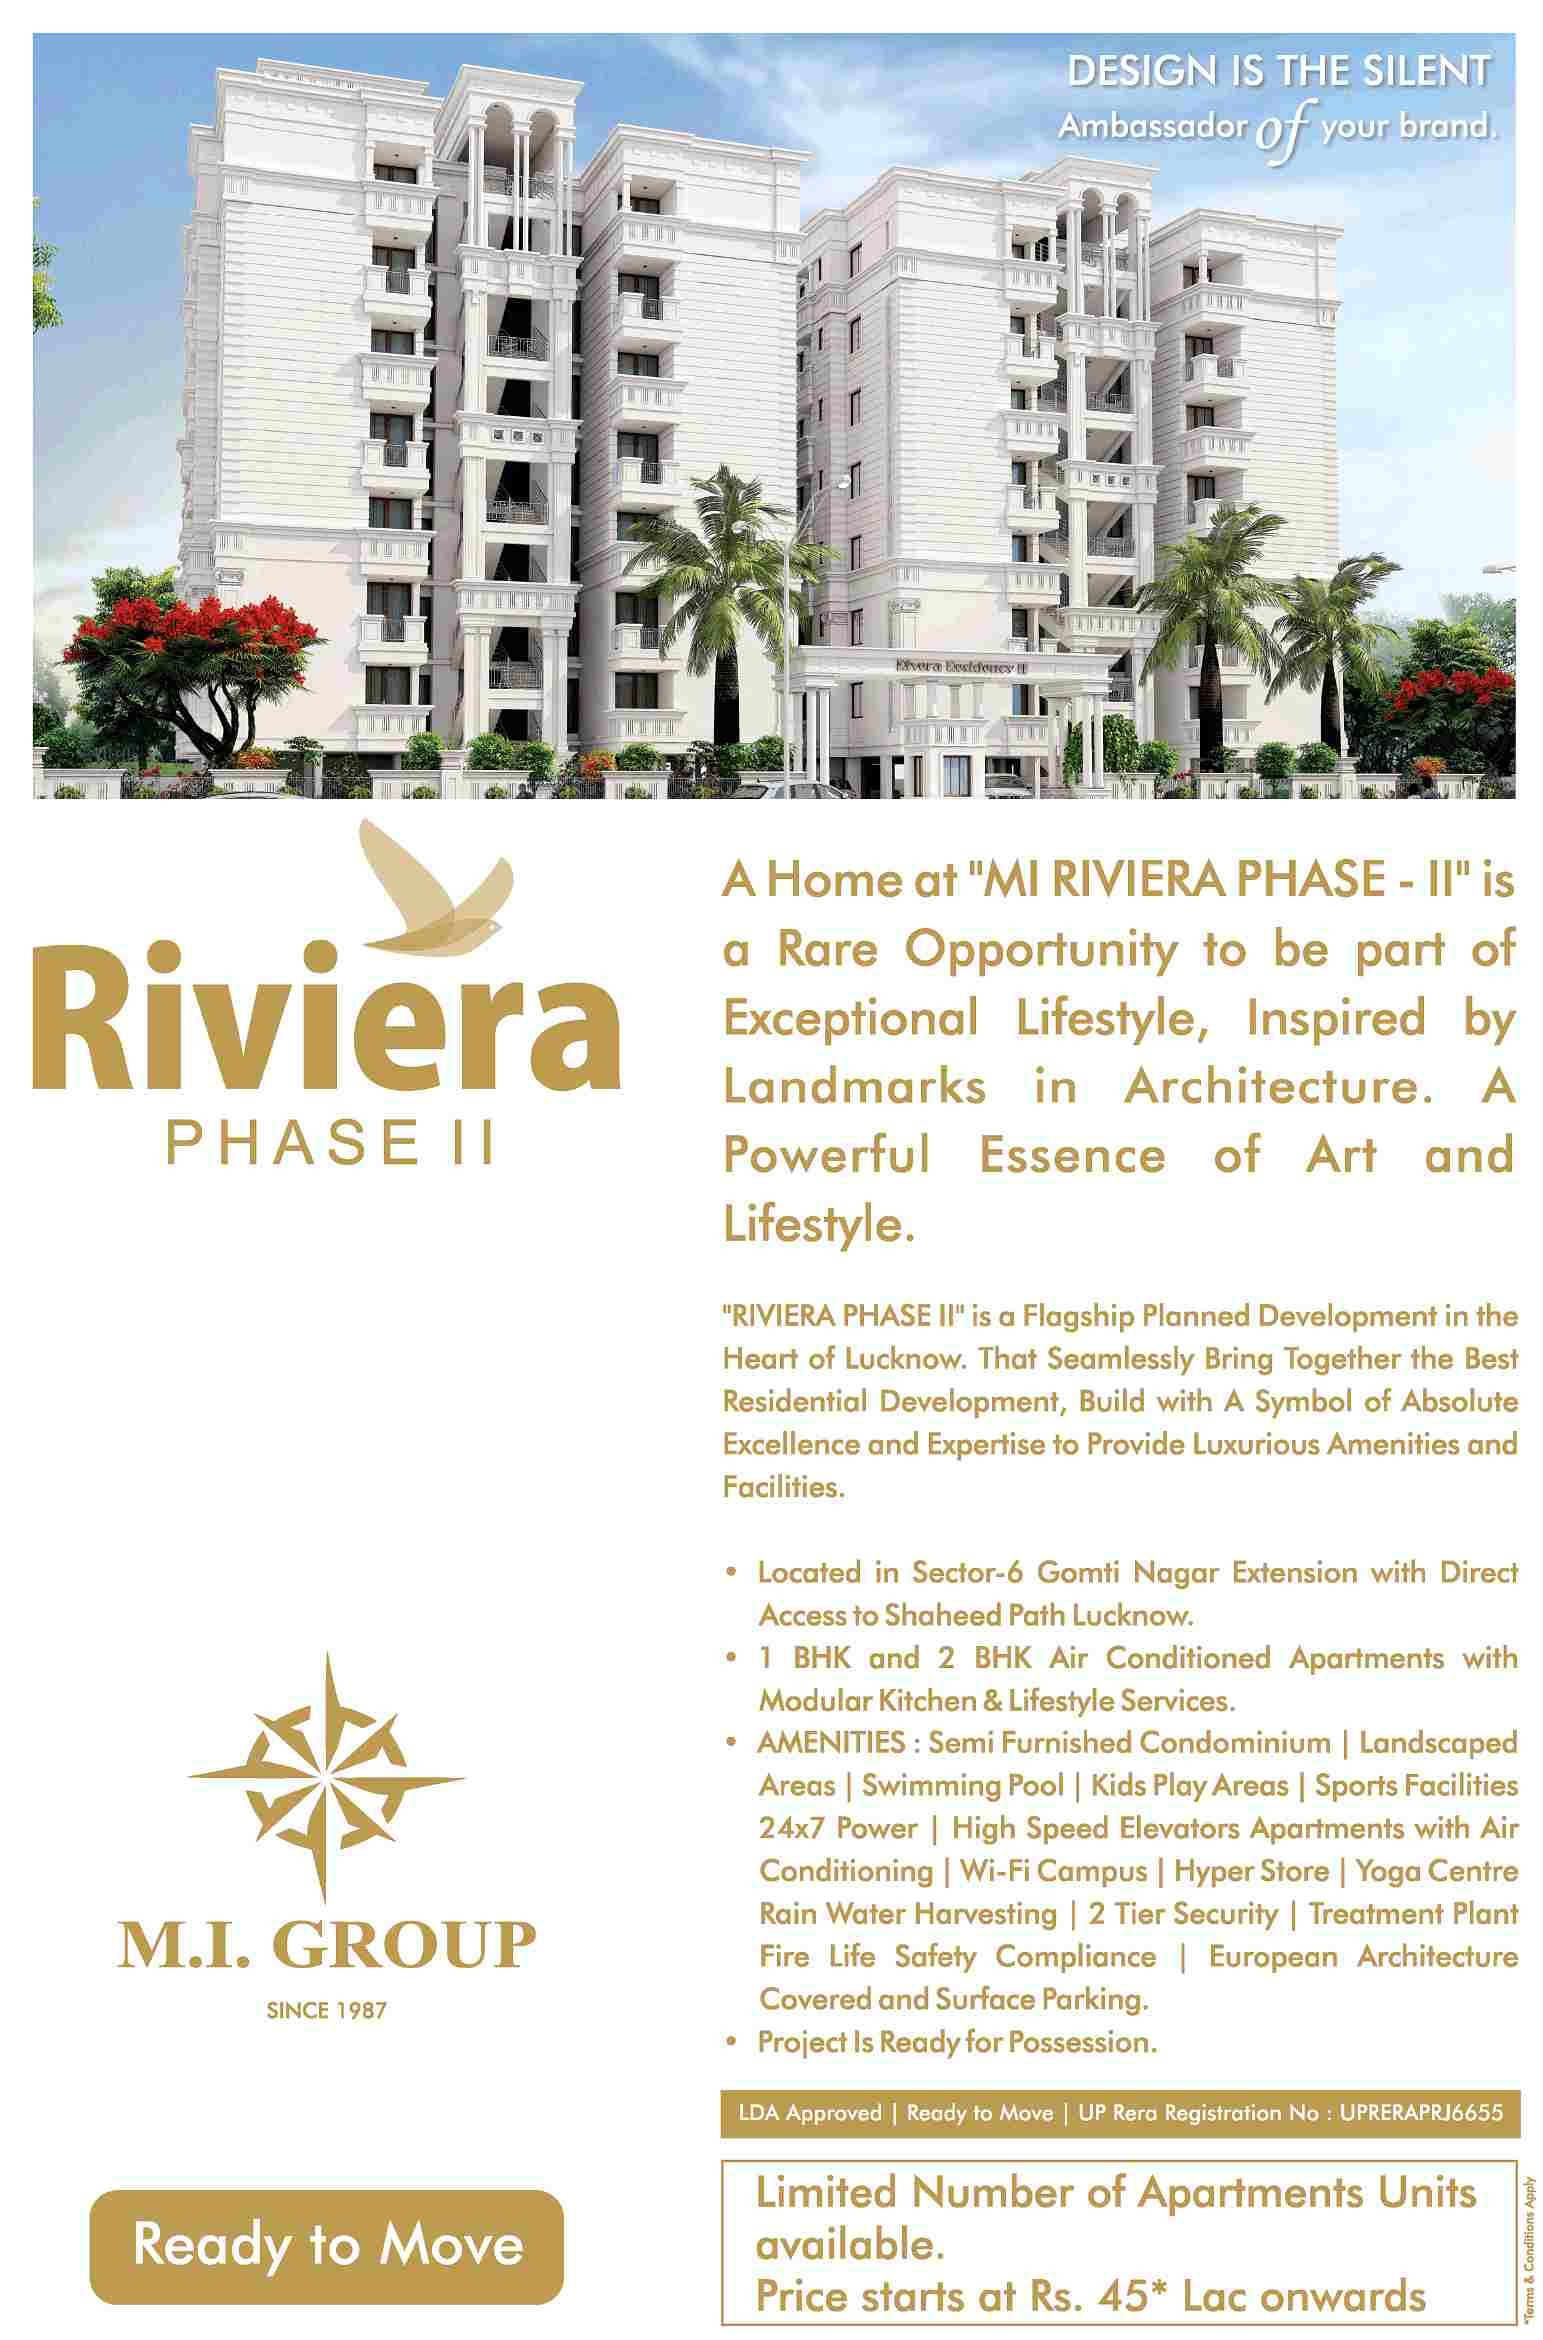 Book ready possession homes @ Rs 45 Lacs at MI Riviera Residency Phase 2 in Lucknow